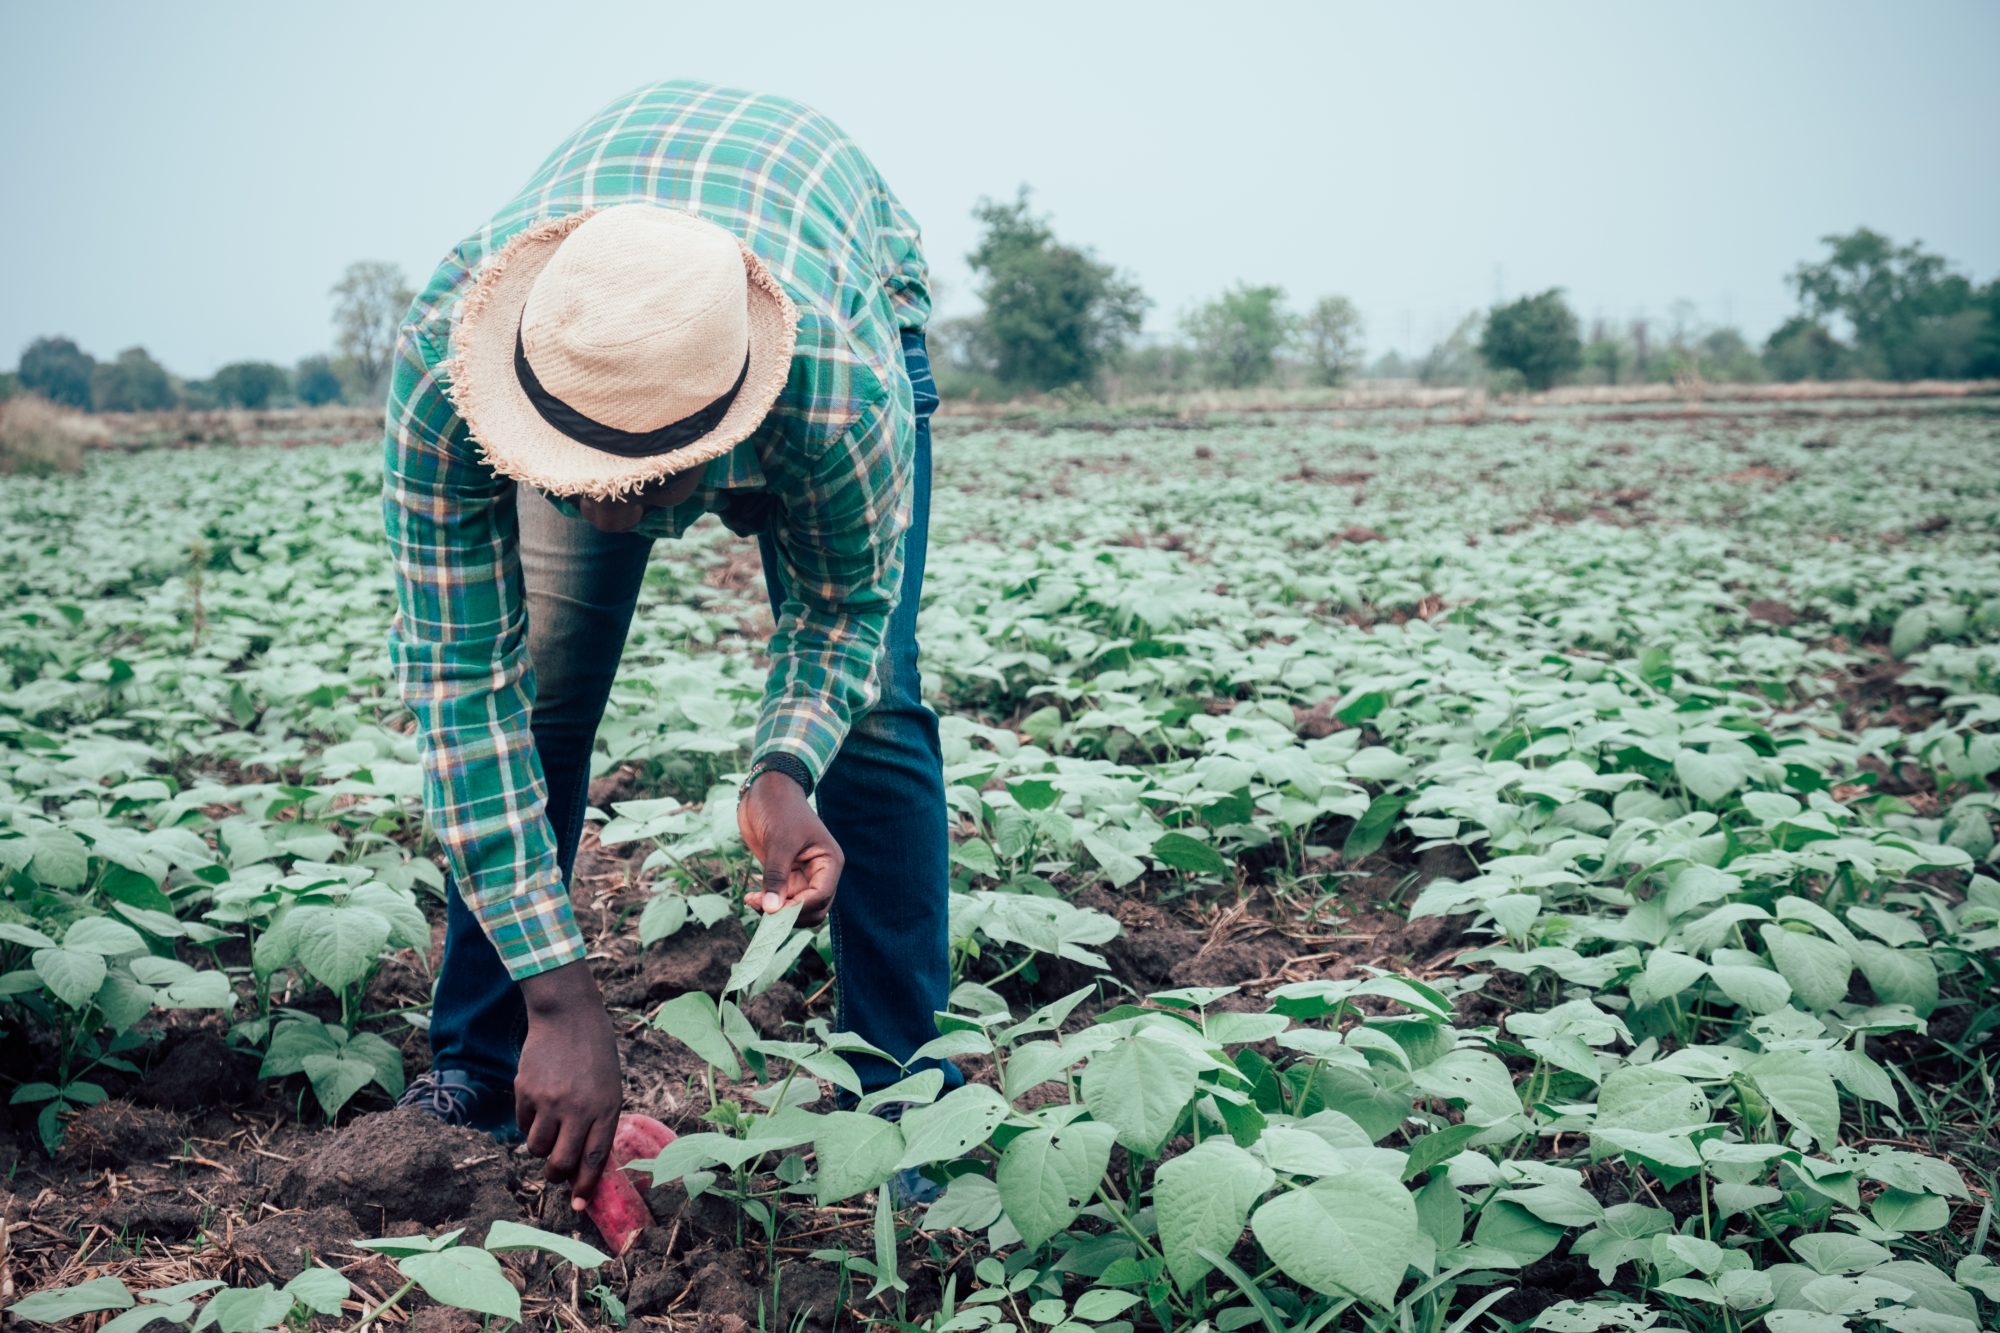 Technology for smallholder agriculture in AfricaChris Henderson, Head of Agriculture, Influence and Impact at Practical Action, explores the rol...